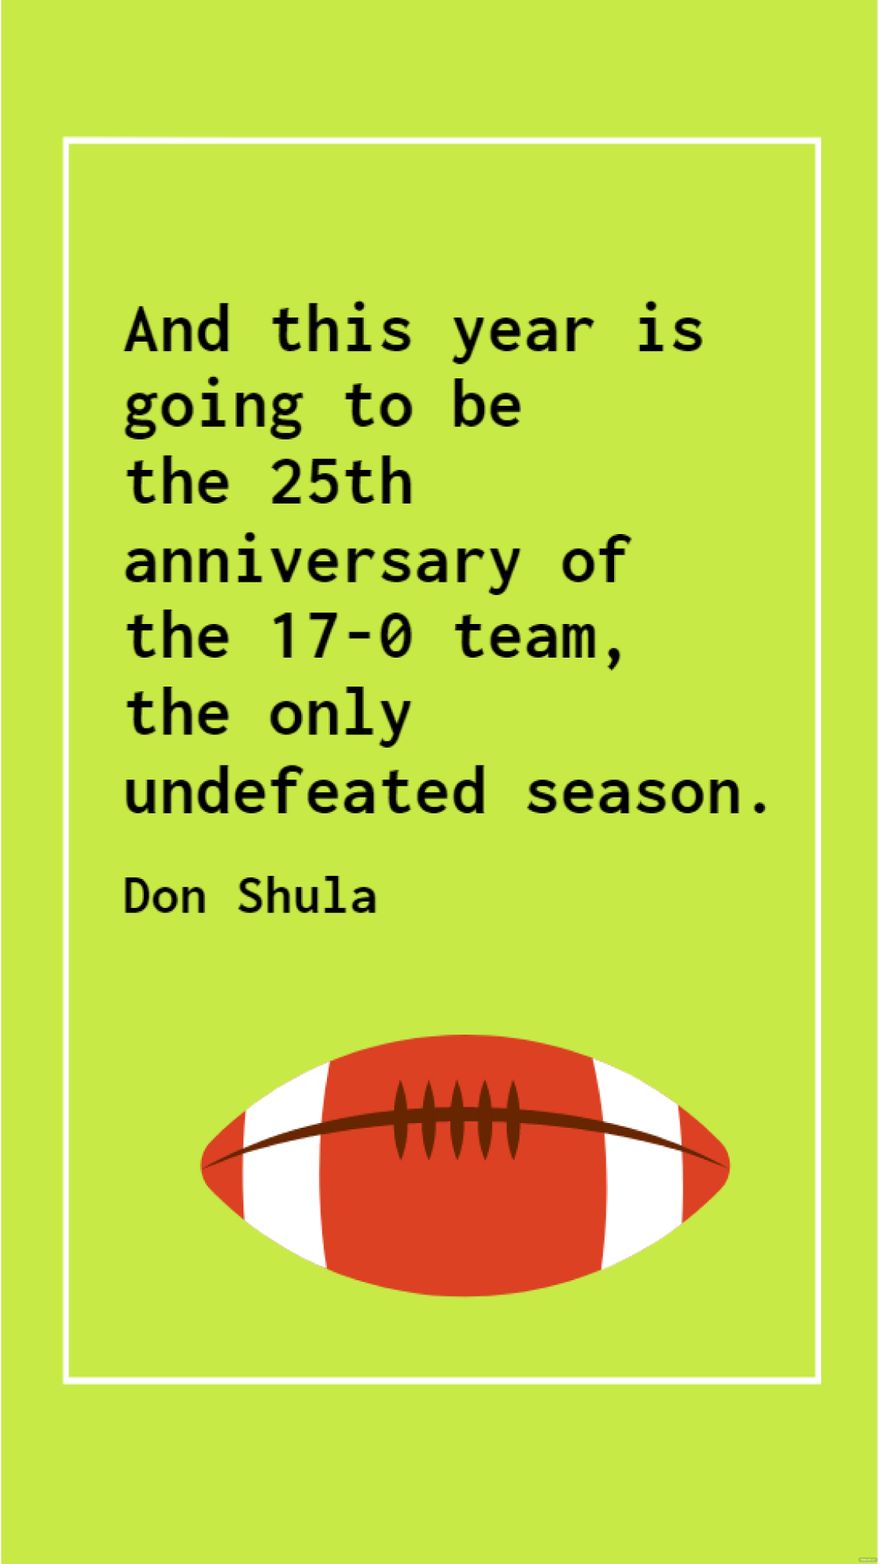 Free Don Shula - And this year is going to be the 25th anniversary of the 17-0 team, the only undefeated season.